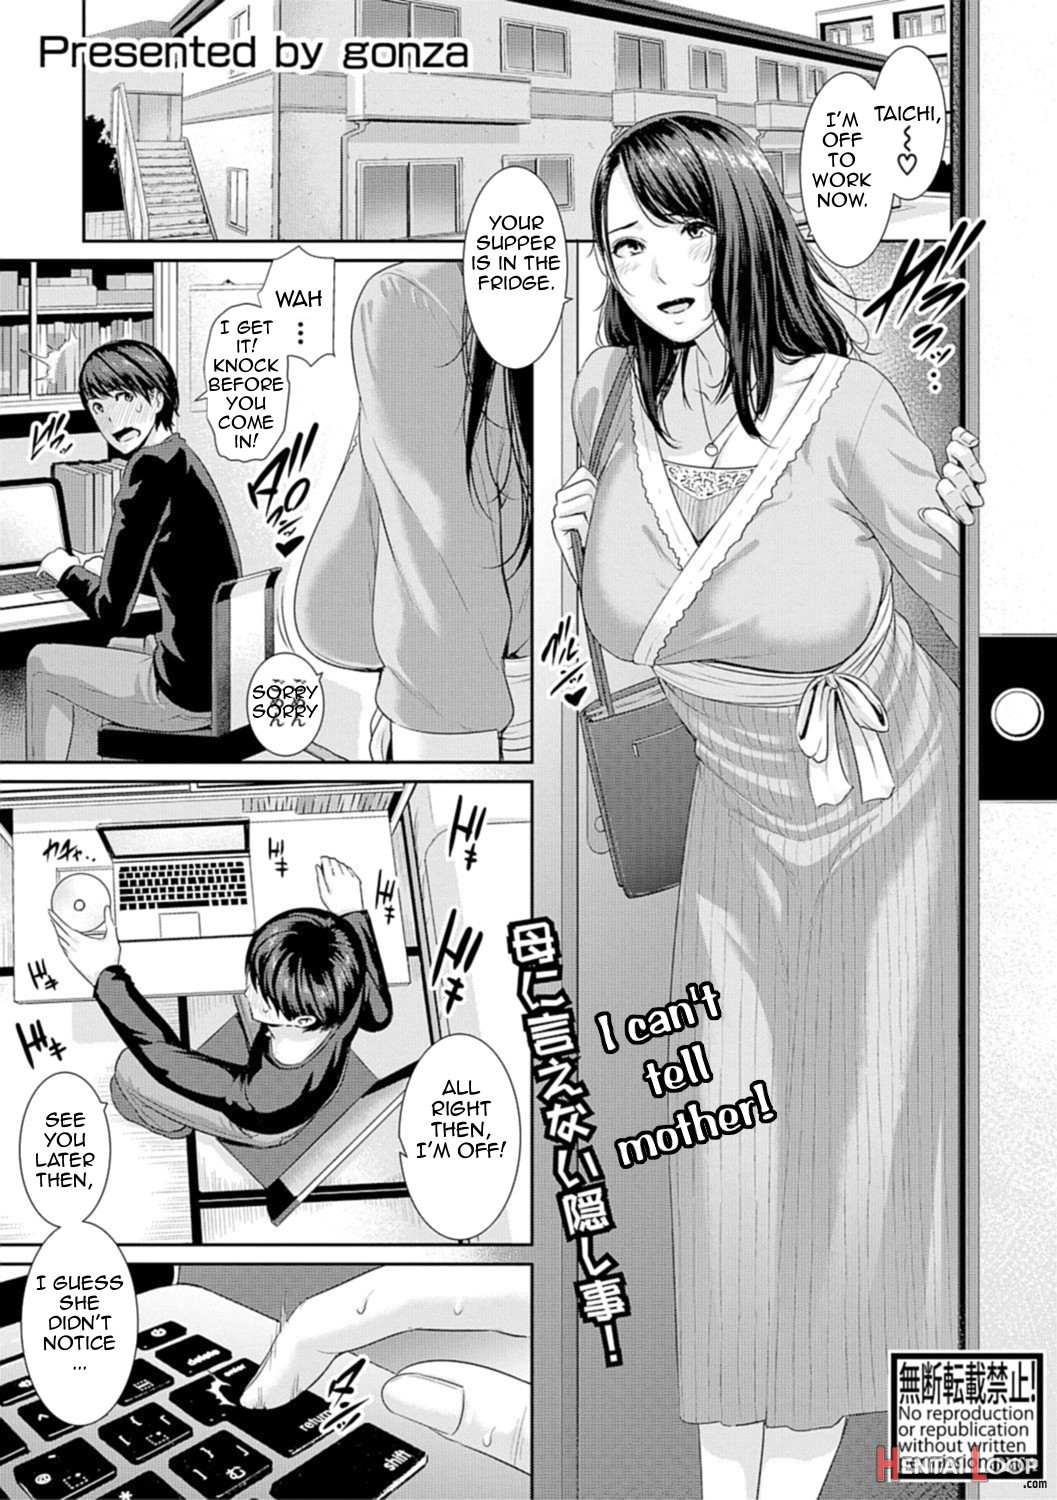 Doujinshi Porn - Mother Is A Porn Star (by Gonza) - Hentai doujinshi for free at HentaiLoop